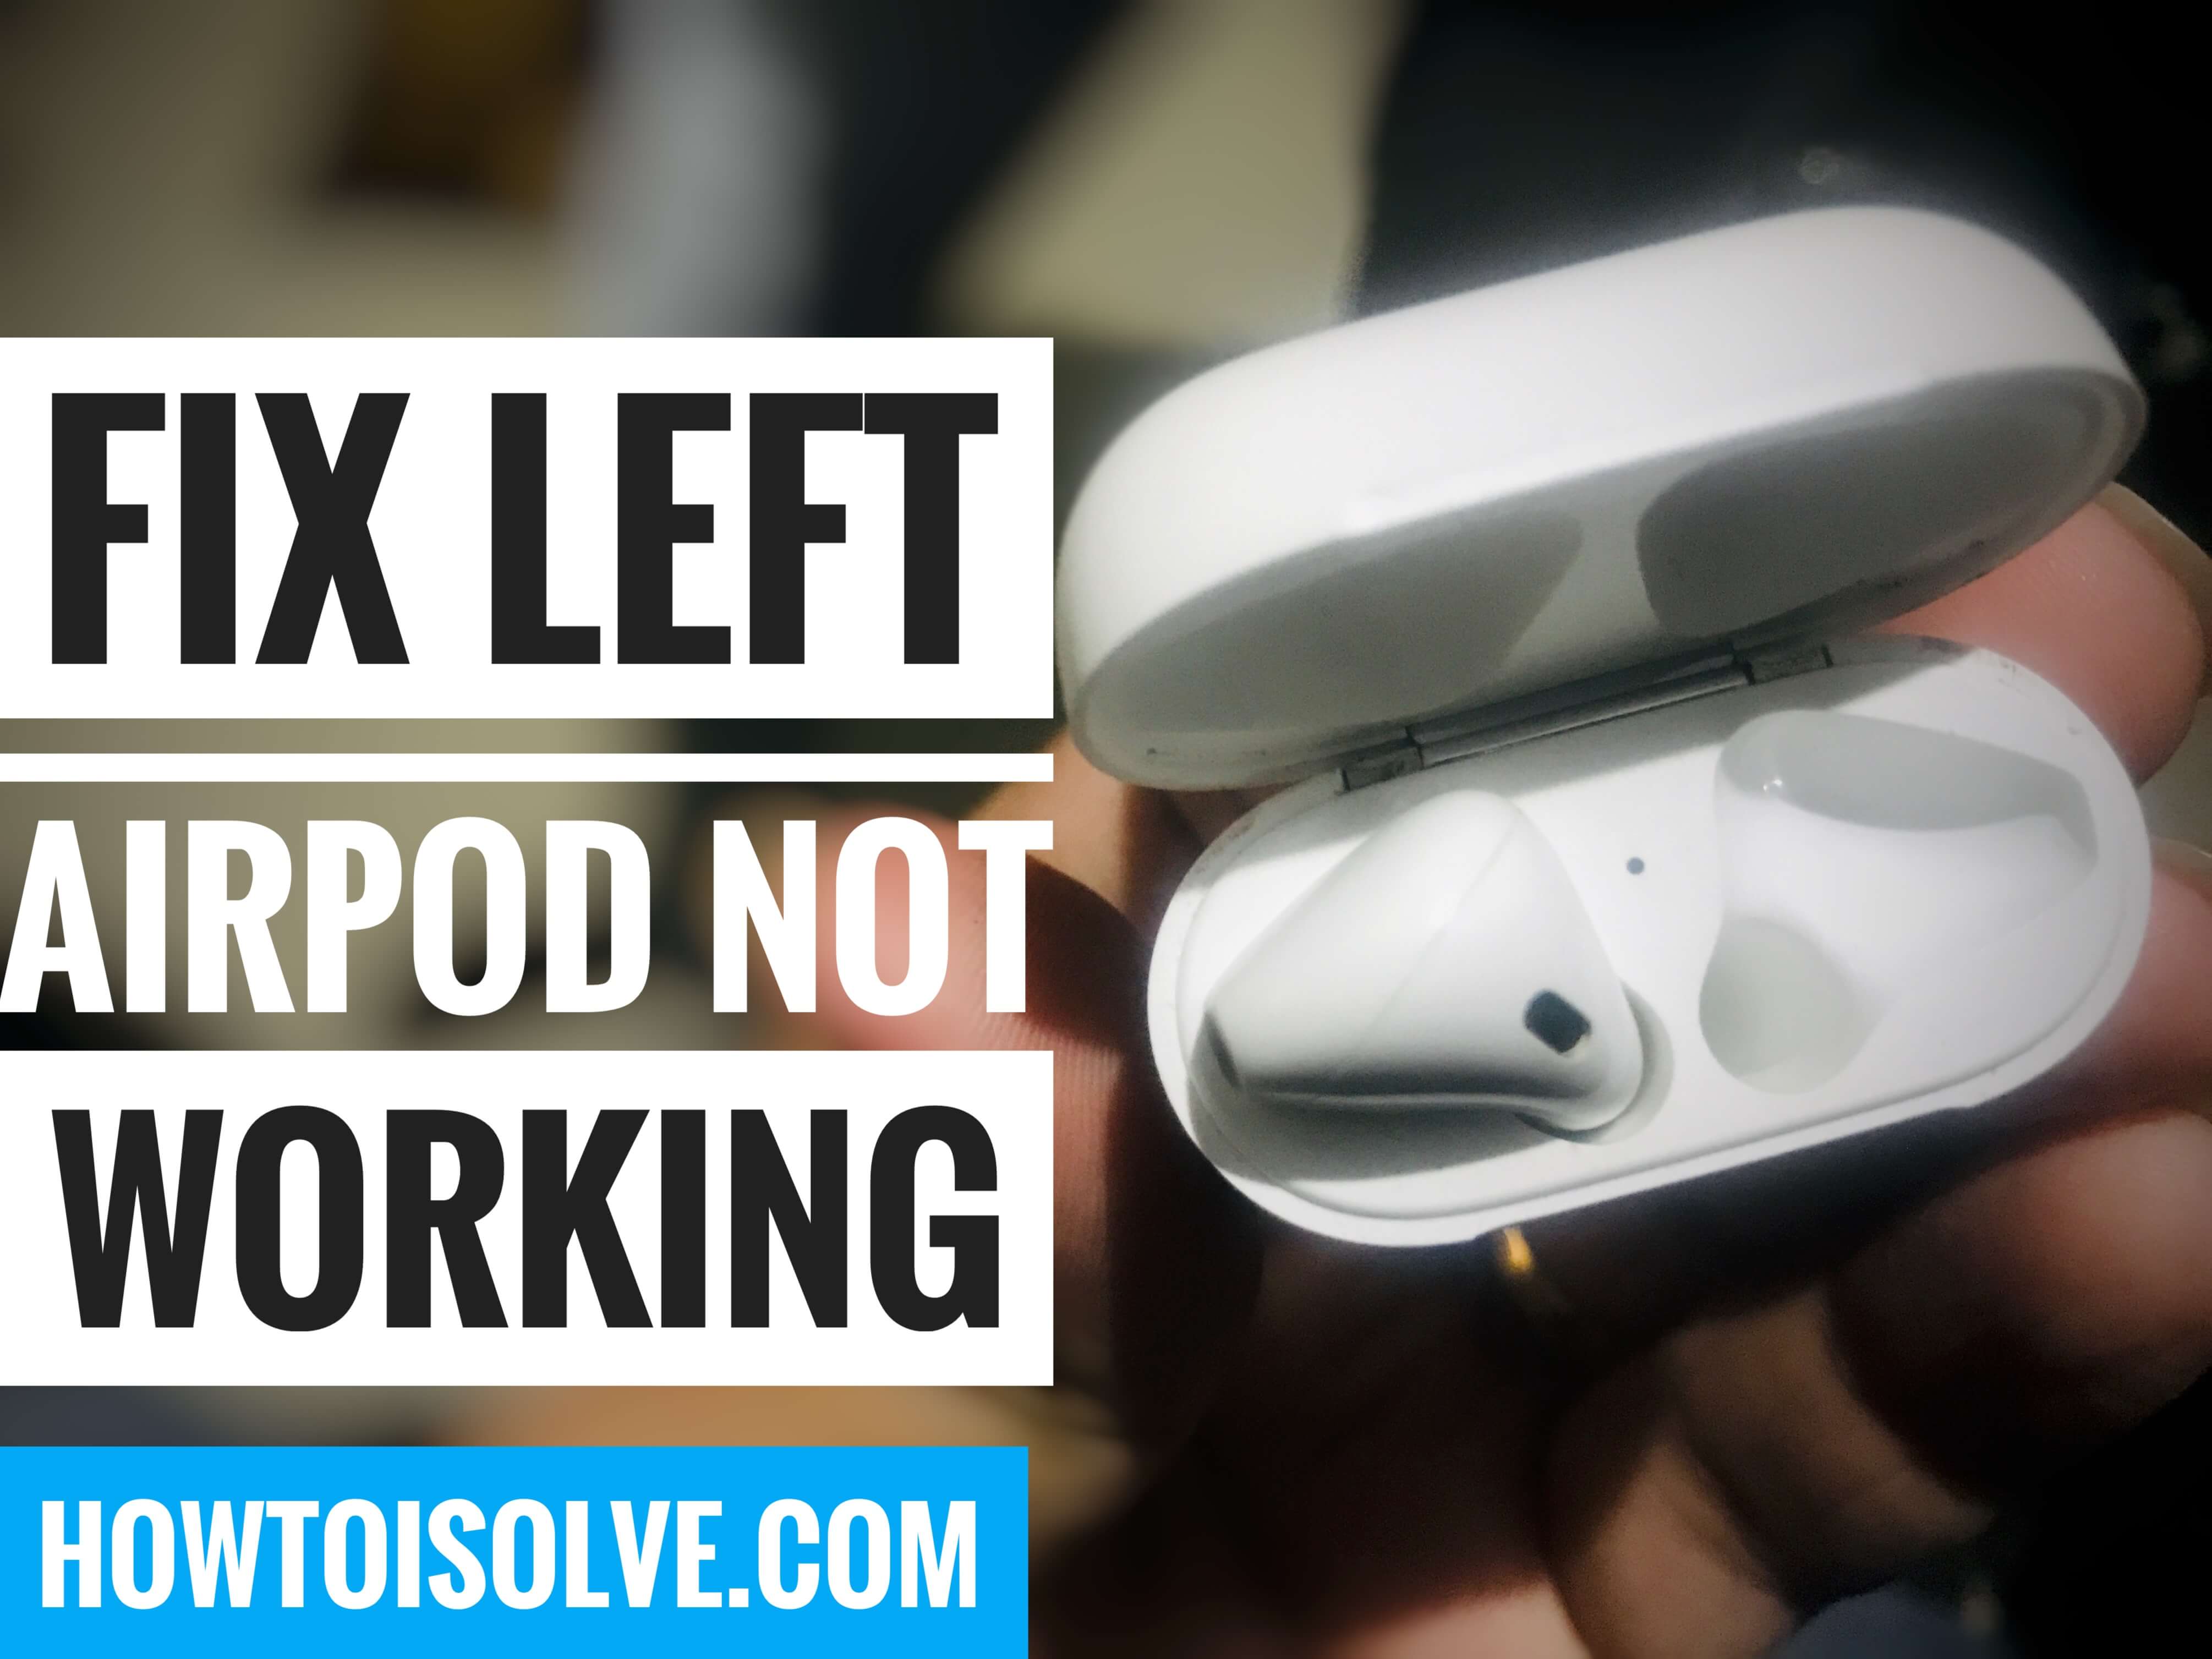 Frill Objector good looking 13 Fixes Right/Left Airpod Not Working (iOS 16.0.2 Updated) 2022